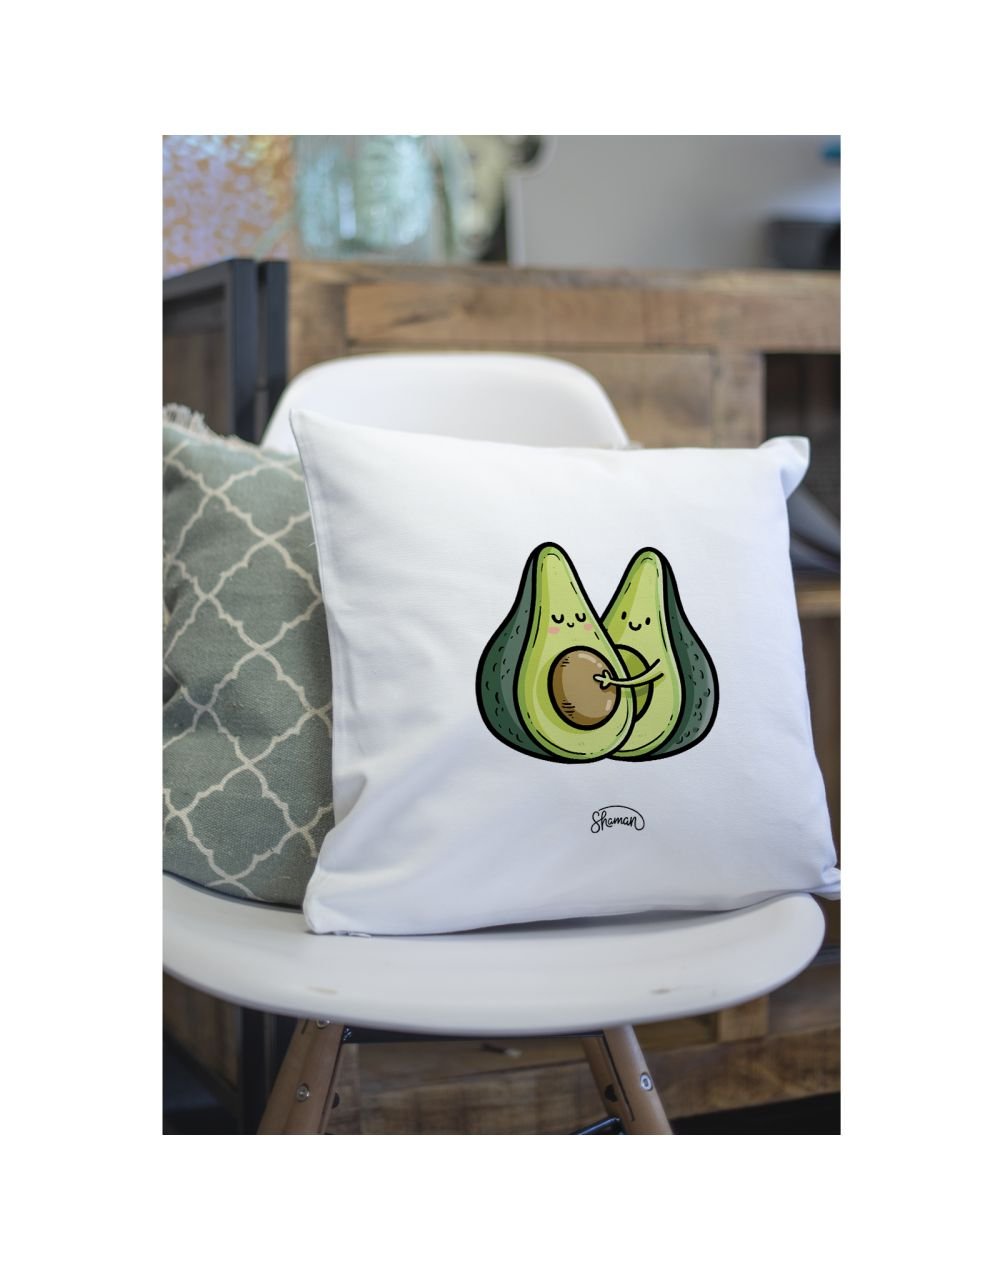 Coussin "Avocats couple"